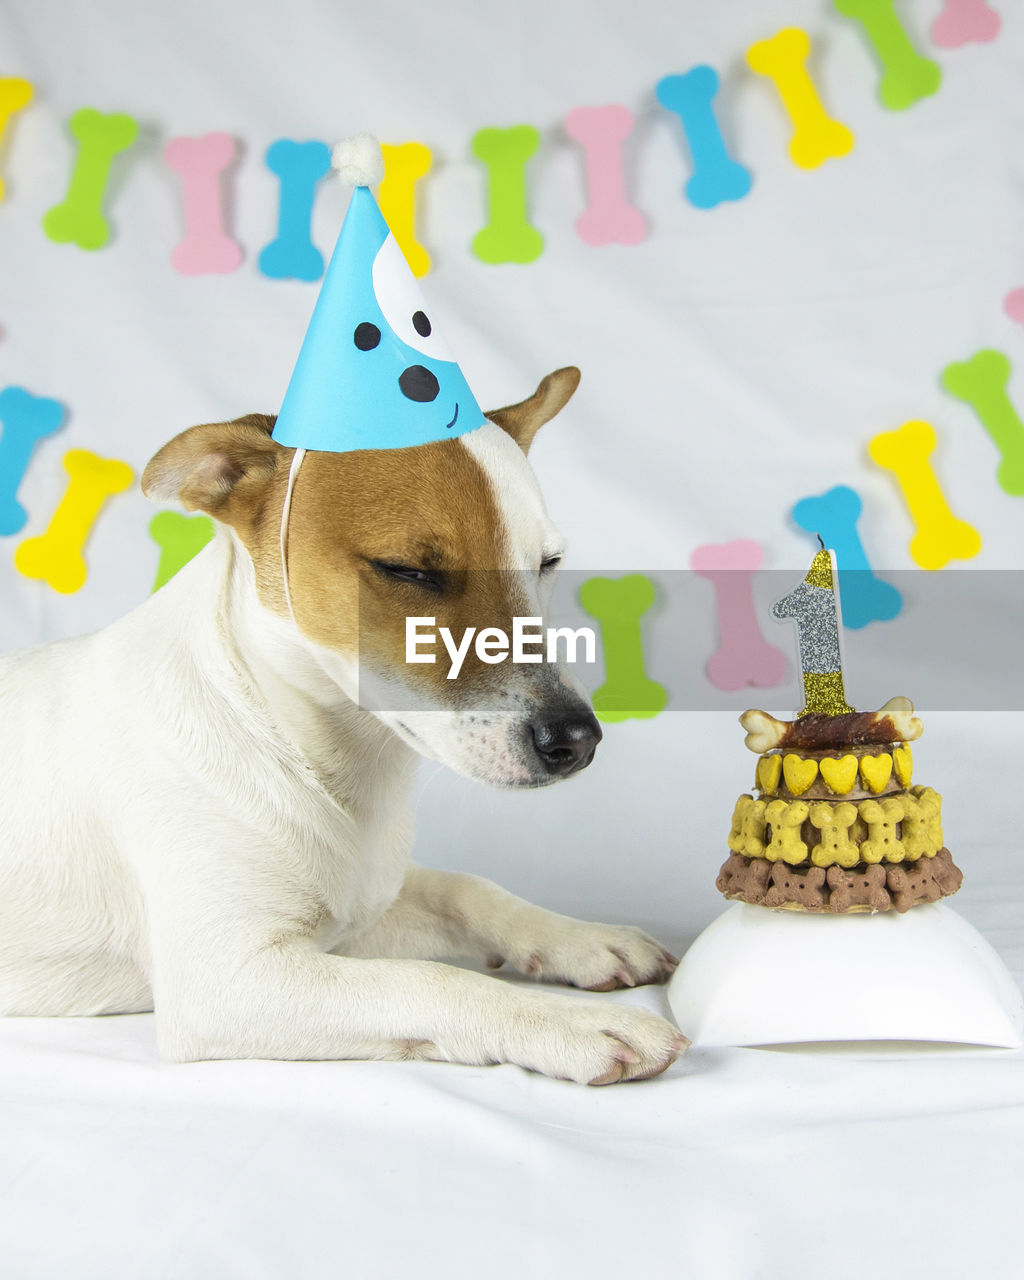 mammal, animal, animal themes, domestic animals, one animal, pet, dog, birthday cake, canine, cute, fun, multi colored, humor, indoors, birthday, anniversary, celebration, no people, toy, young animal, yellow, party, lap dog